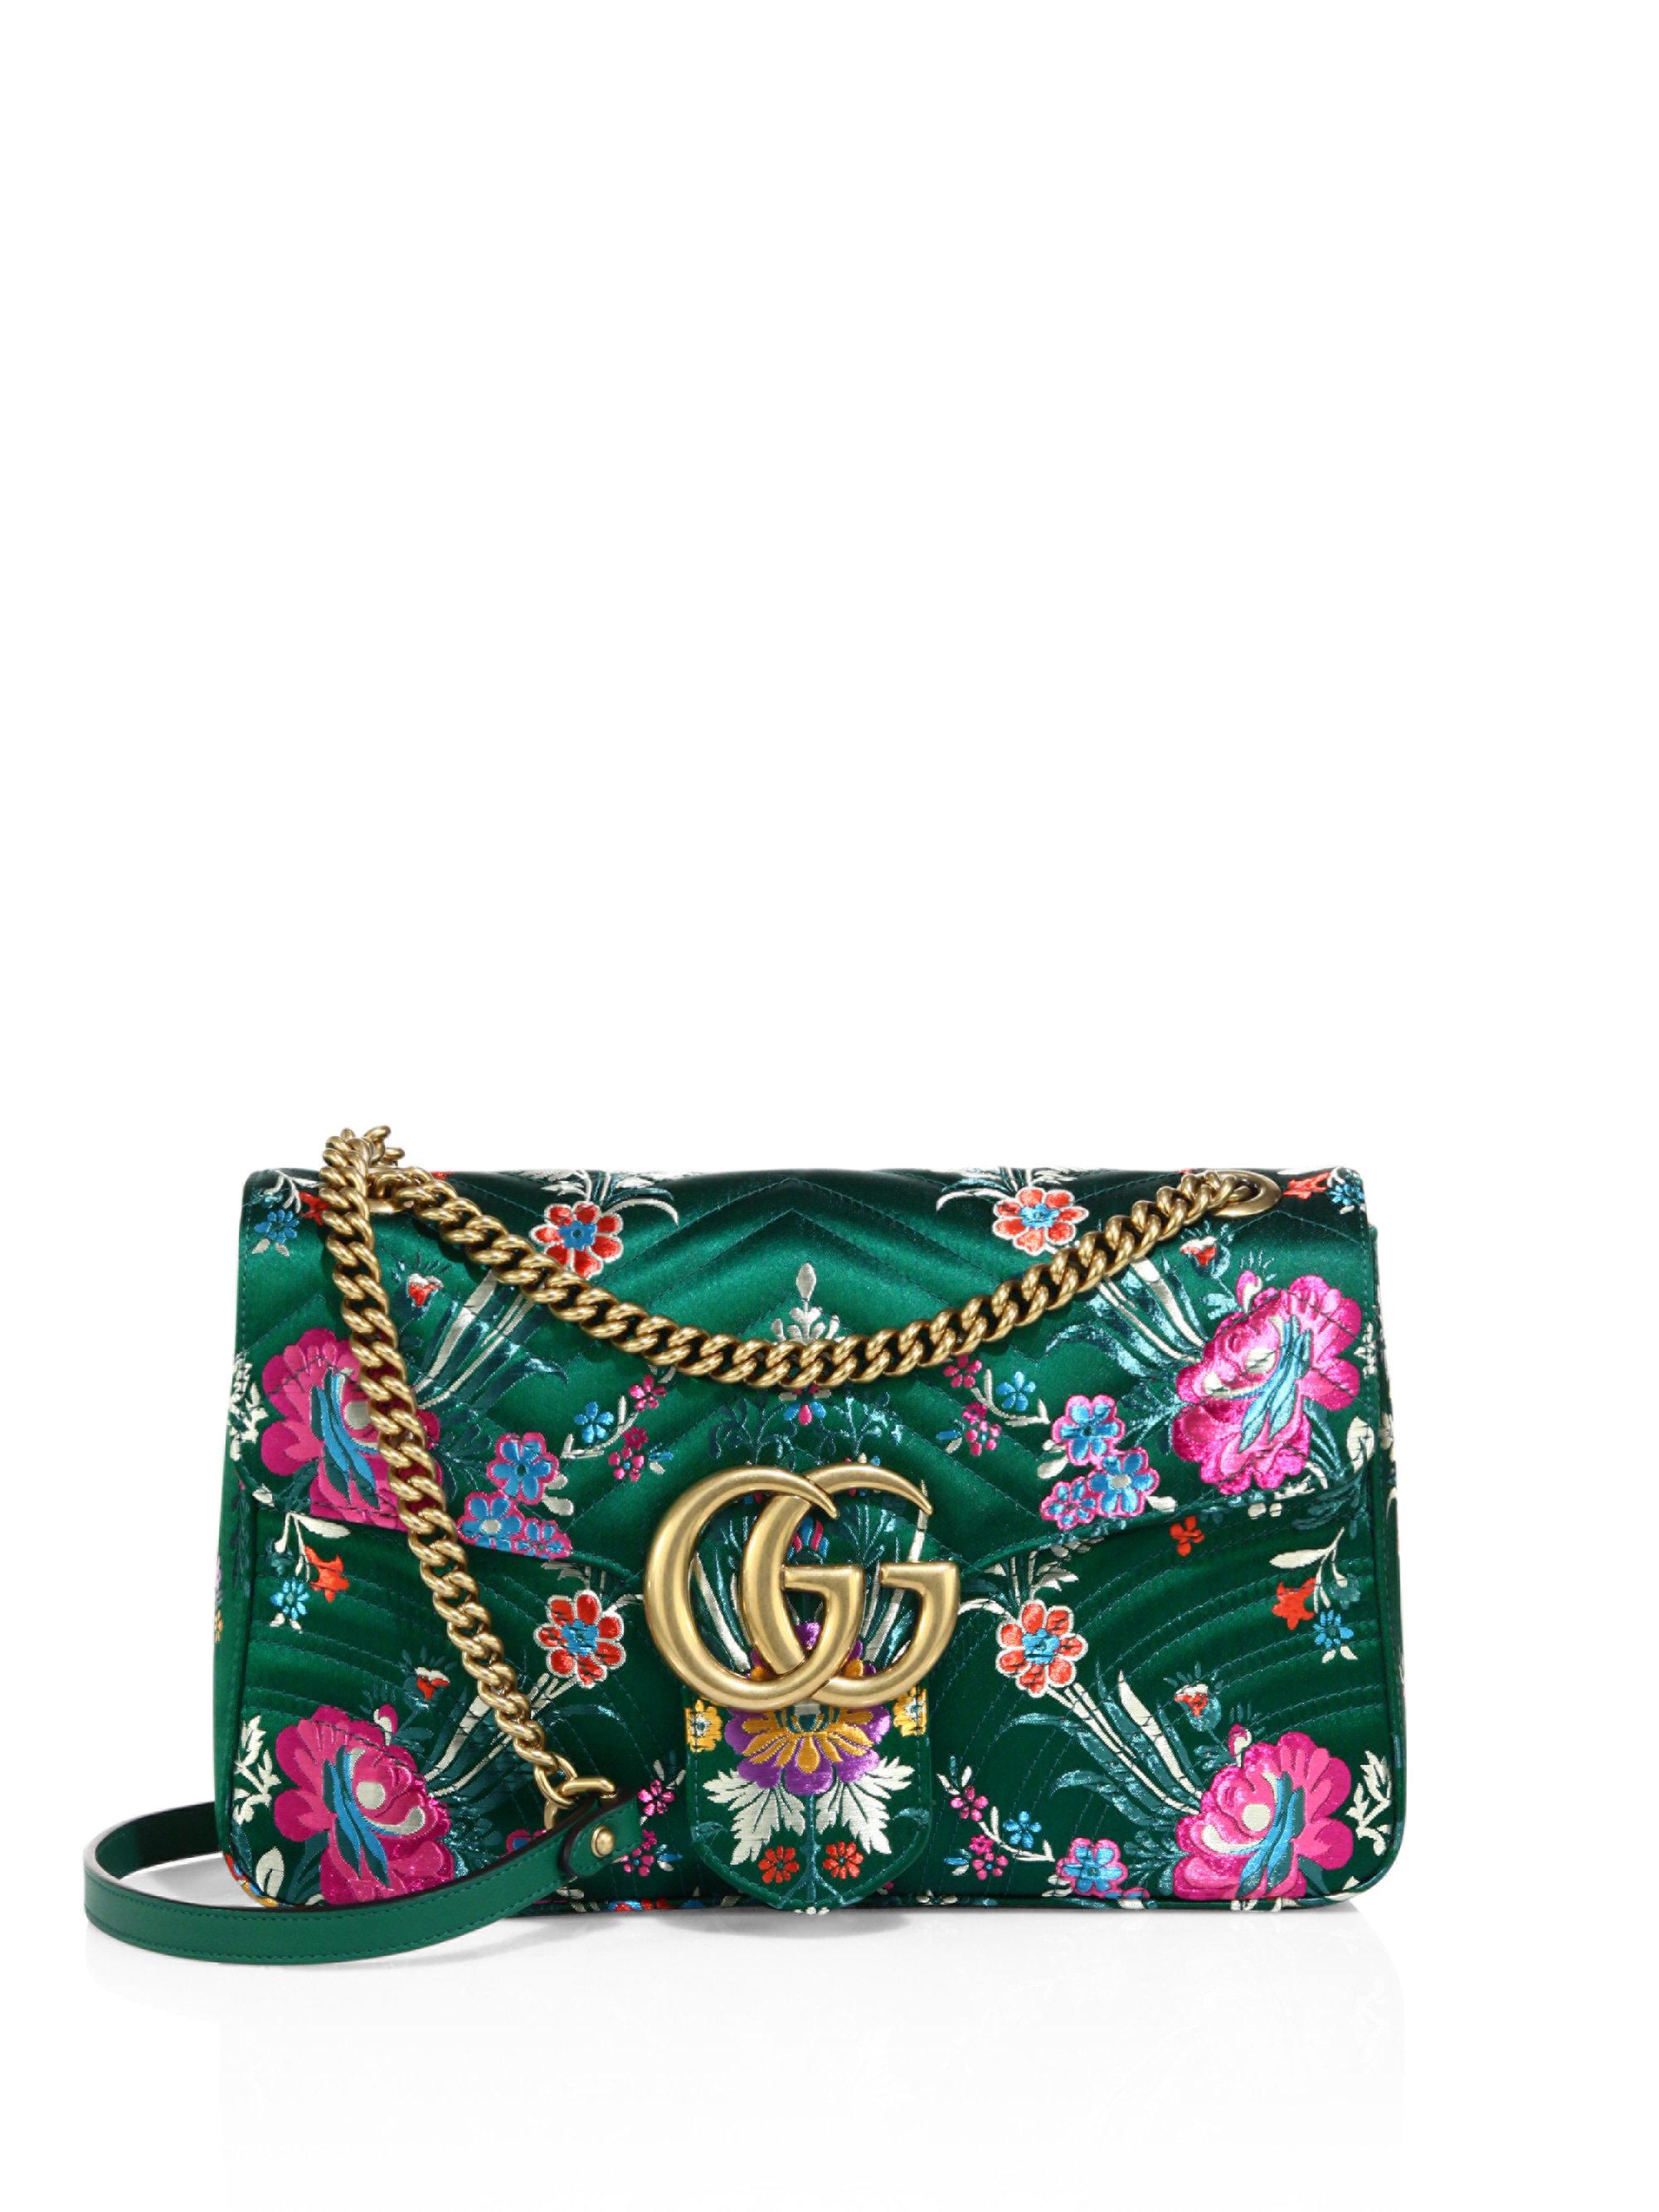 Gucci Small Gg Marmont Matelasse Floral Jacquard Chain Shoulder Bag in ...